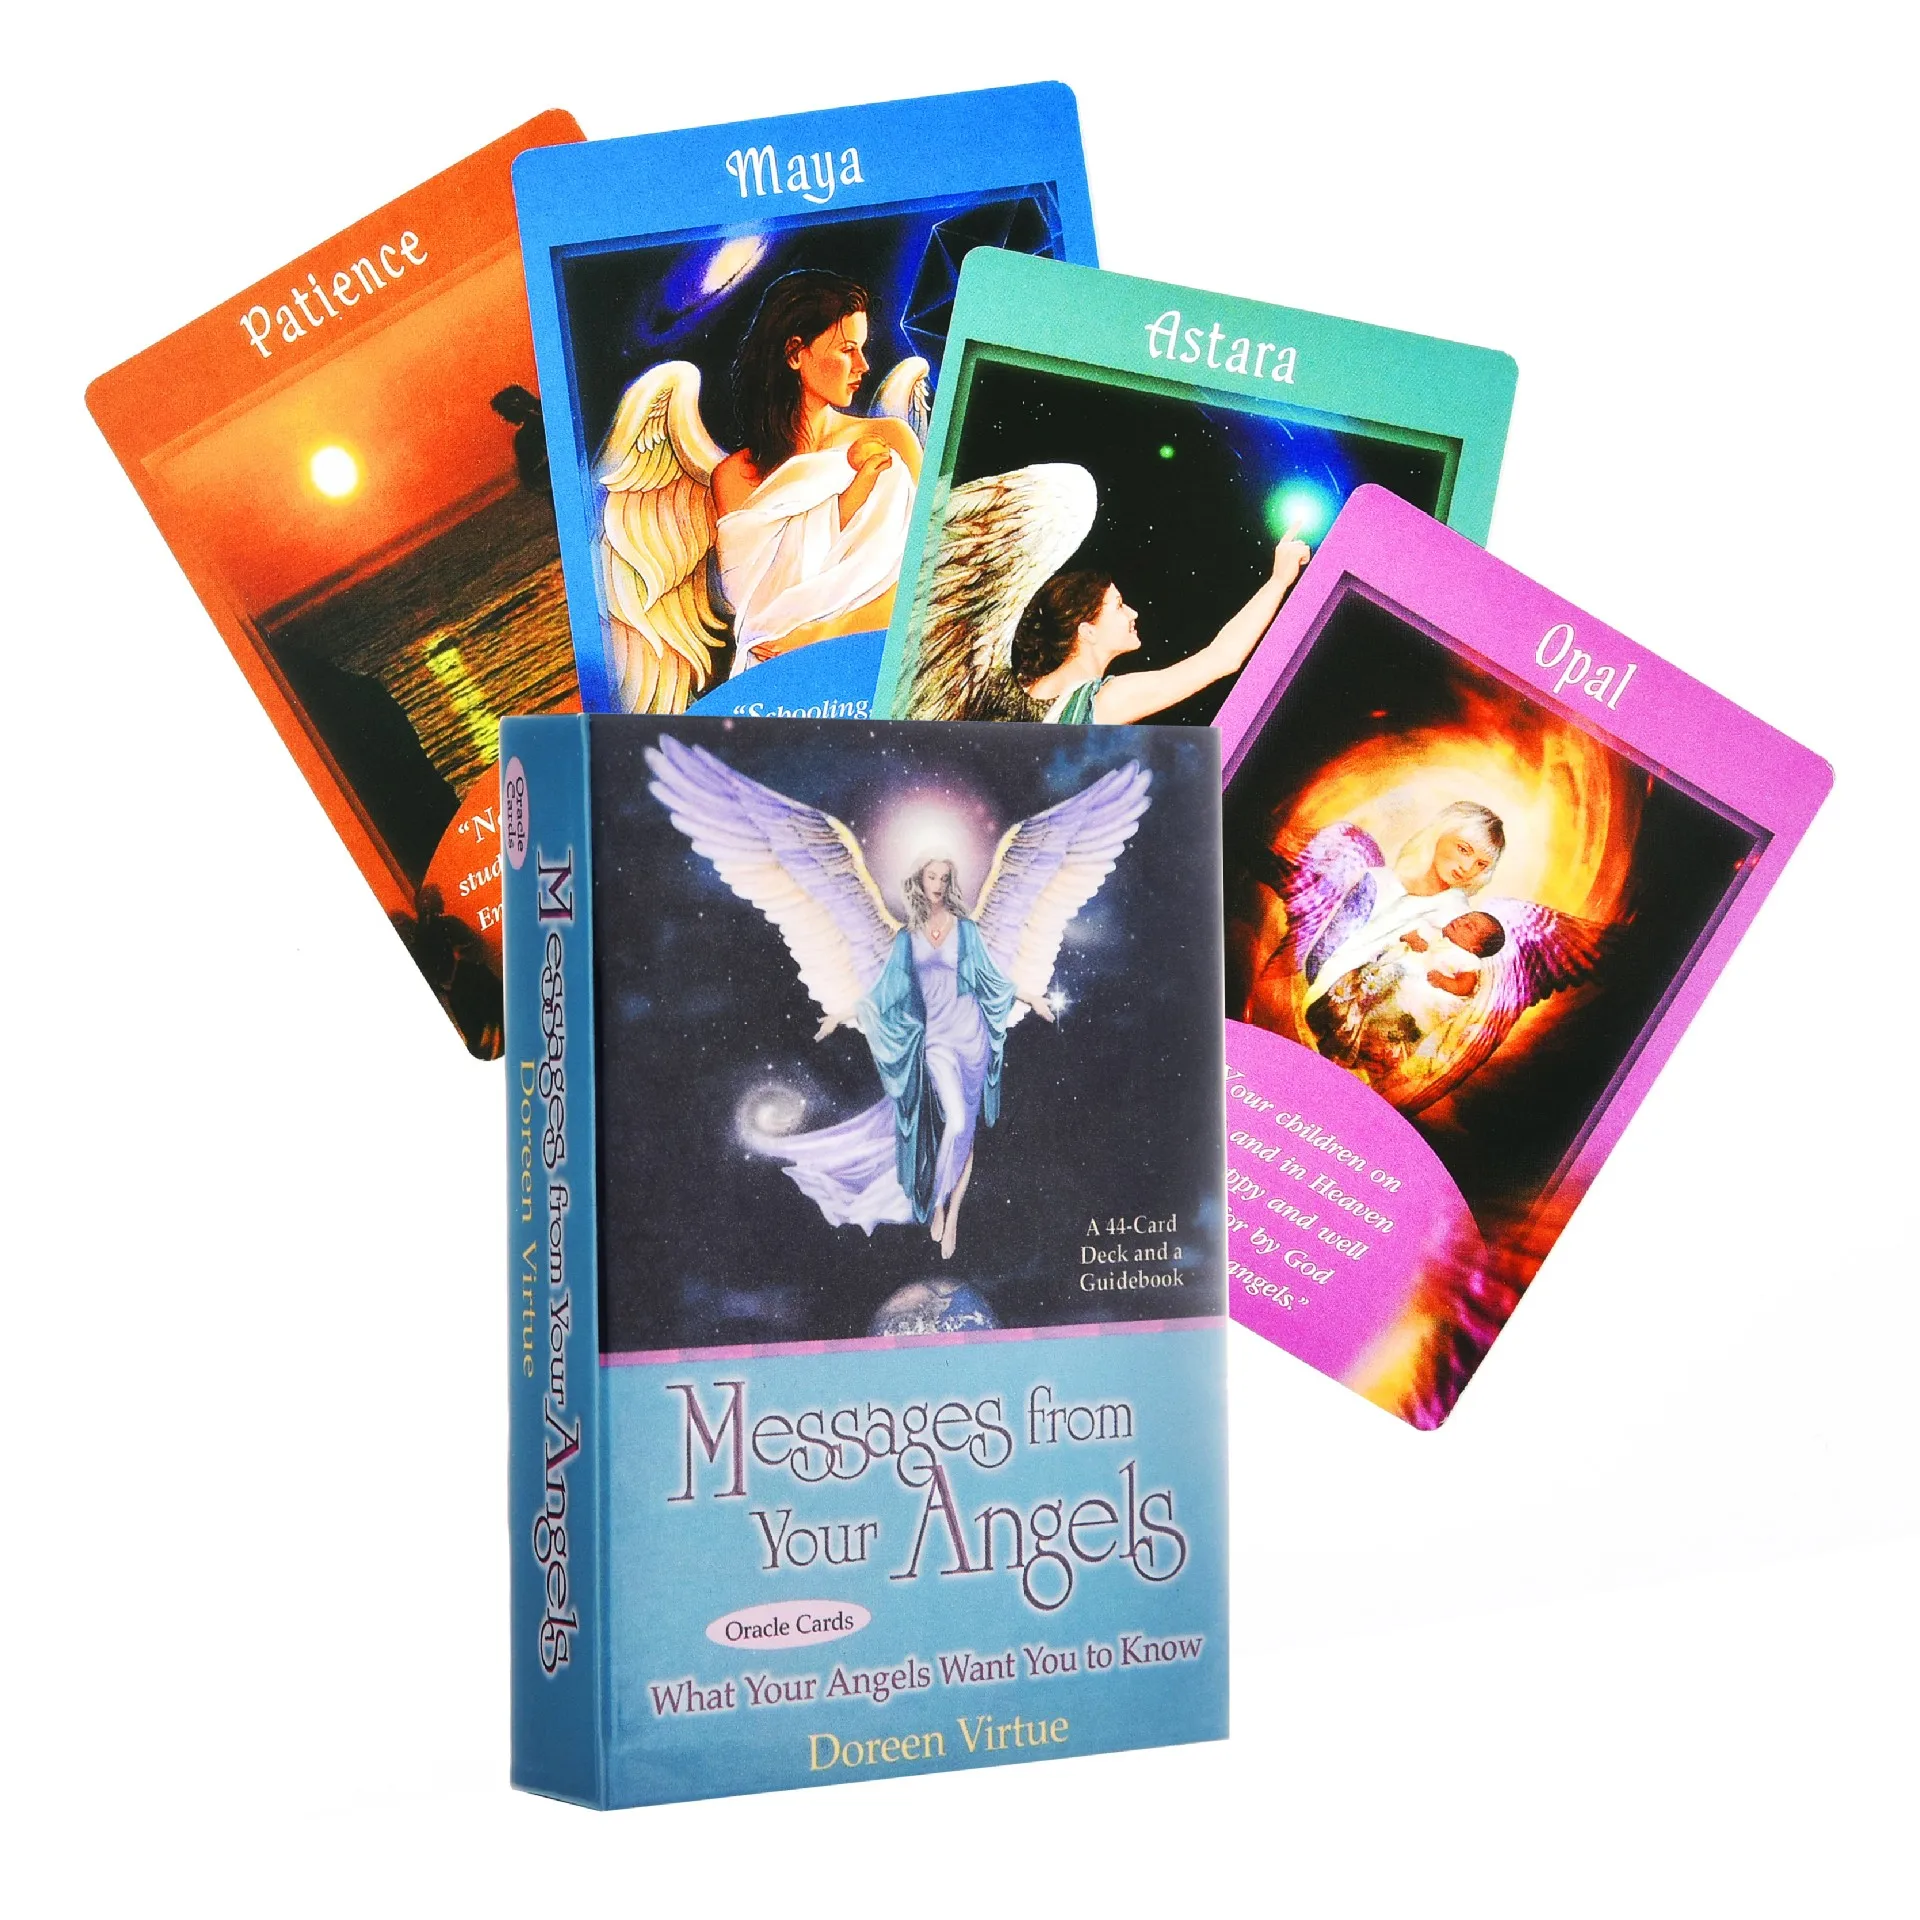 

Messages From Your Angels: What Your Angels Want you to Know Cards angel readings give exact step-by-step guidance